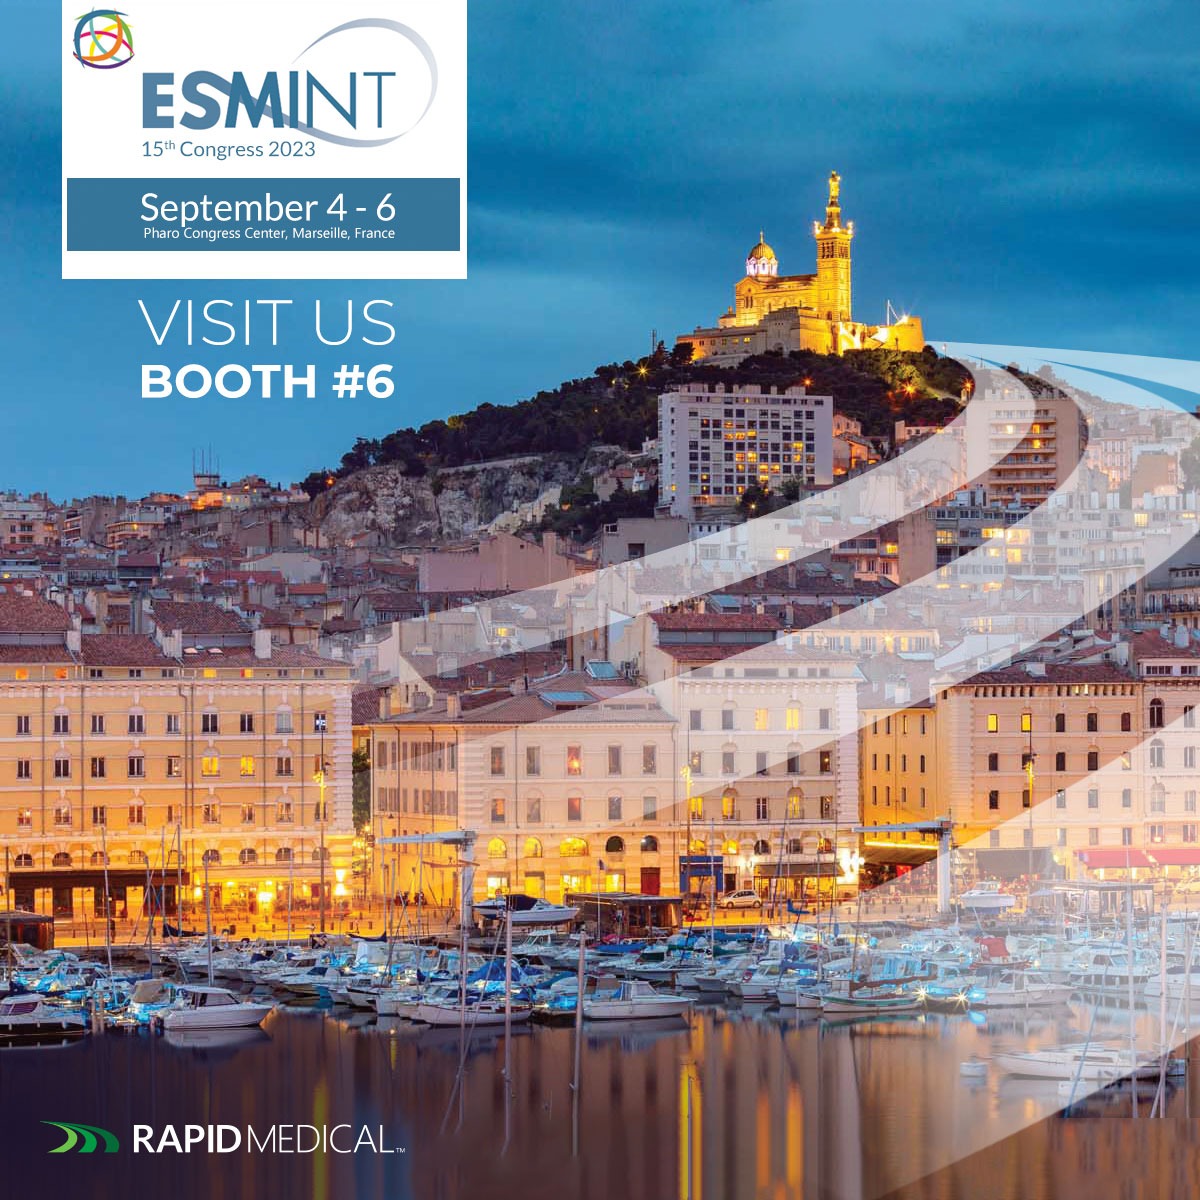 #ESMINT2023 is around the corner! Join us at booth 6. Try your hand at the #TIGERTRIEVER Simulator & compete for the highest score! #RapidMedical #stroke #ESMINT #neurointervention